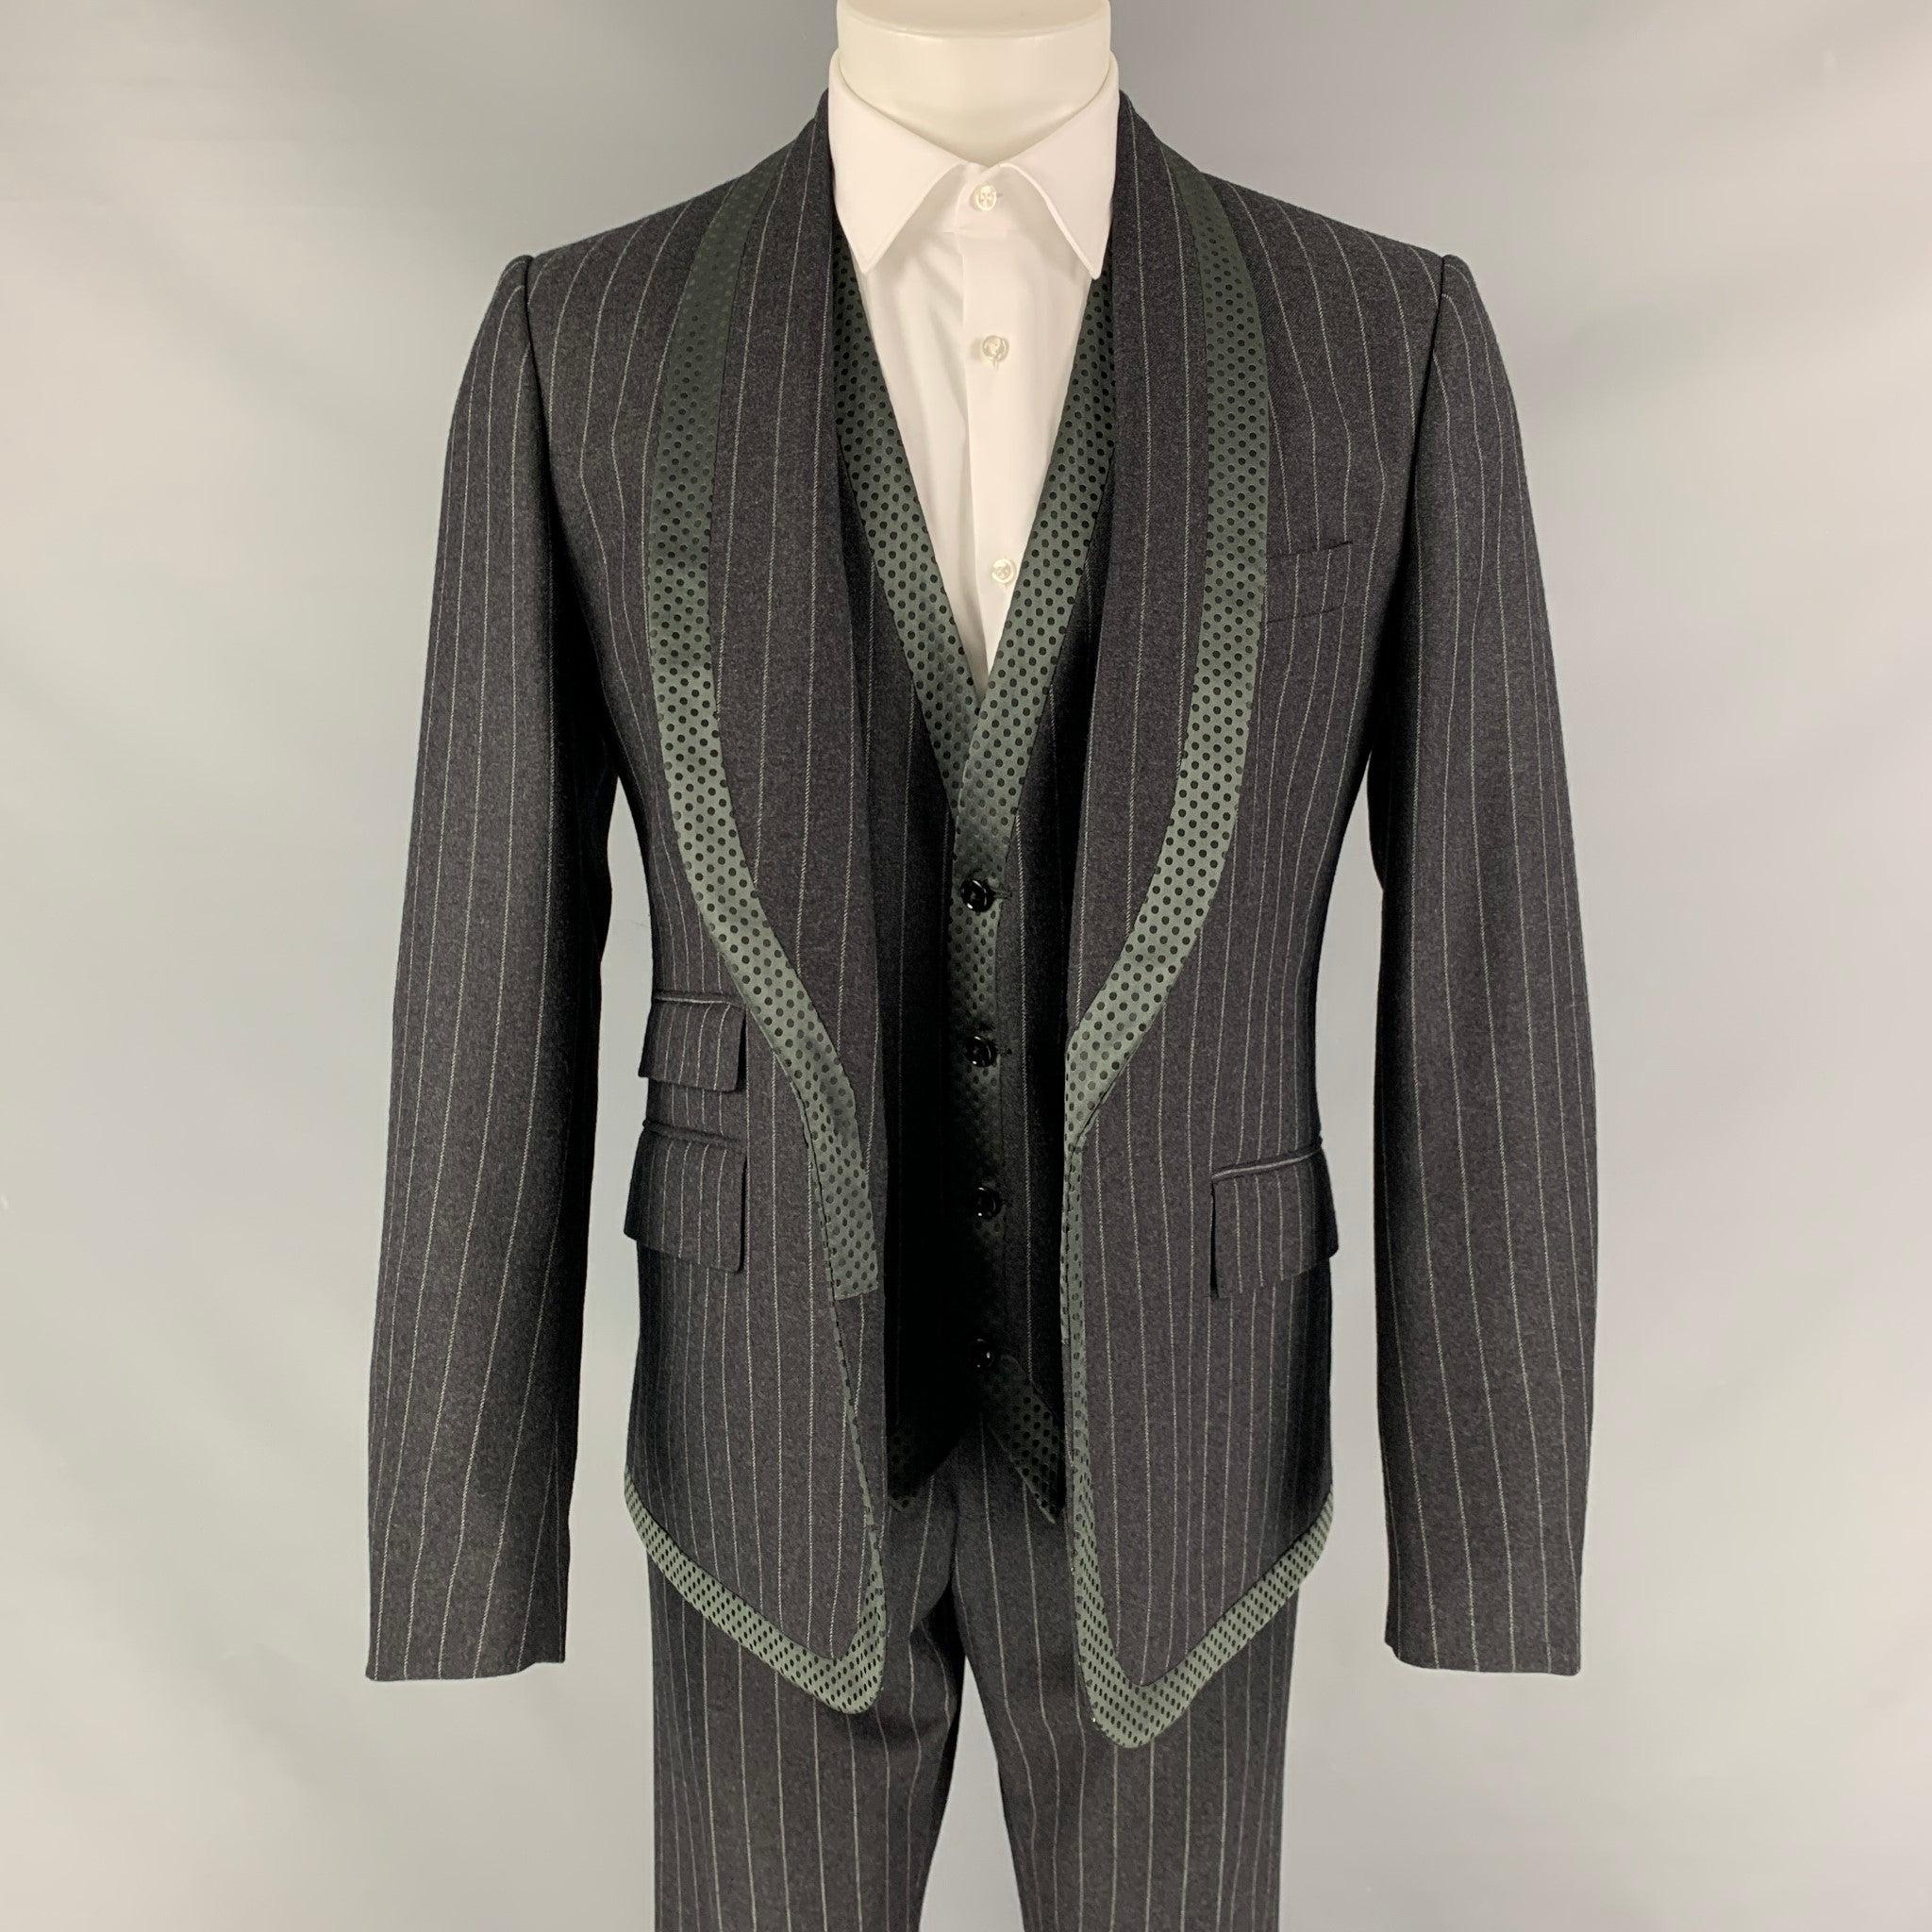 DOLCE & GABBANA 3 Piece
suit comes in a gray chalkstripe virgin wool with a full liner and includes a single breasted, single button sport coat with shawl collar and a matching vest and flat front trousers. Waist and length of pants need to be